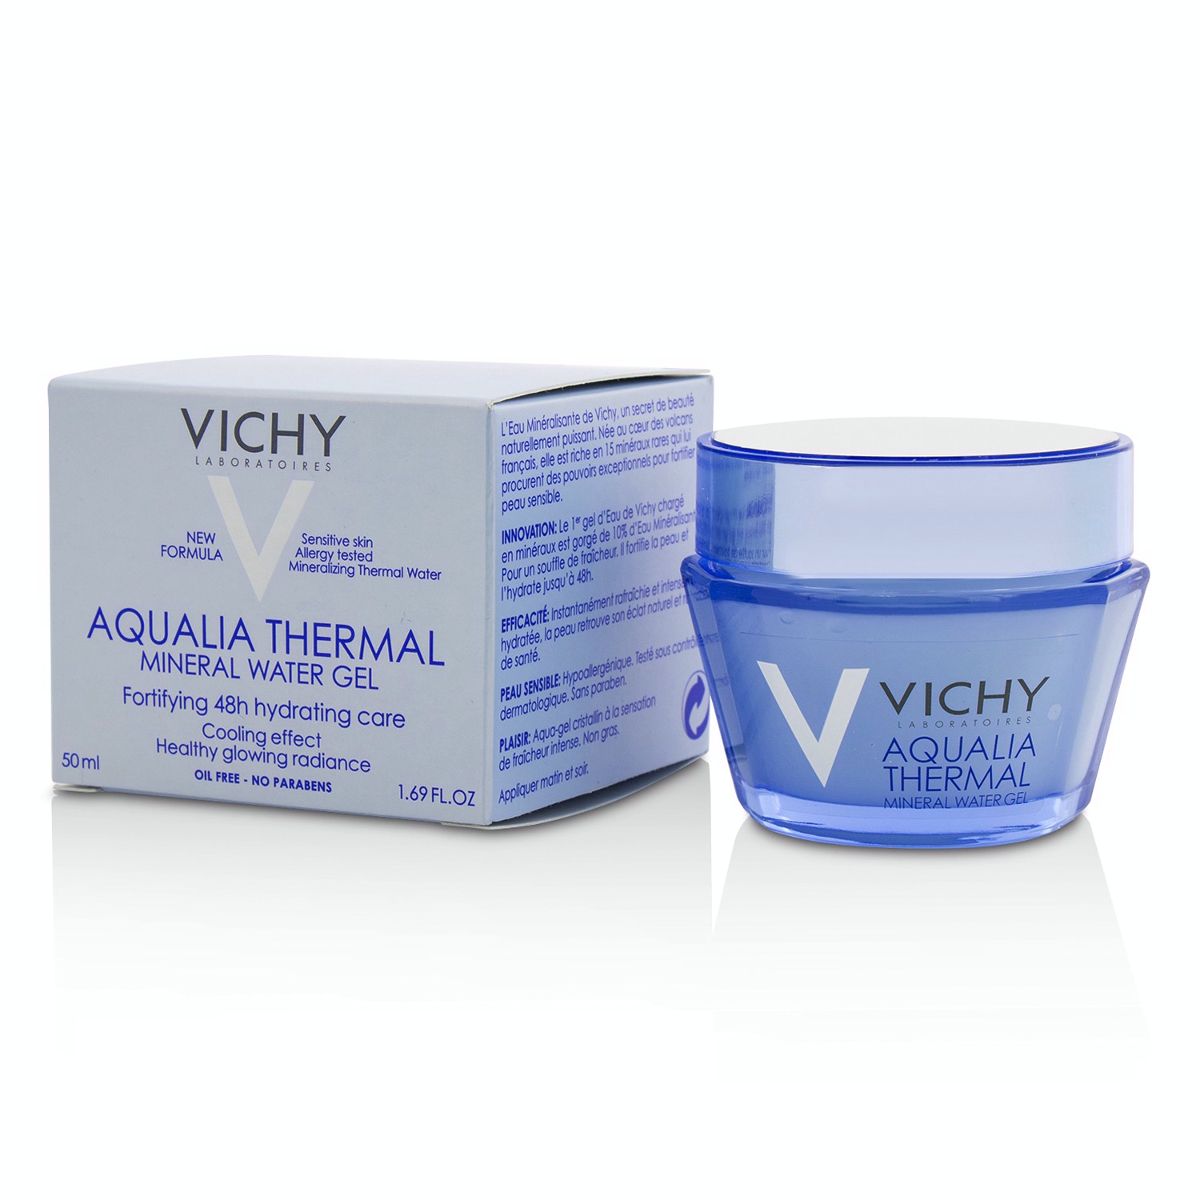 Aqualia Thermal Mineral Water Gel - Fortifying 48h Hydrating Care 22076 Vichy Image